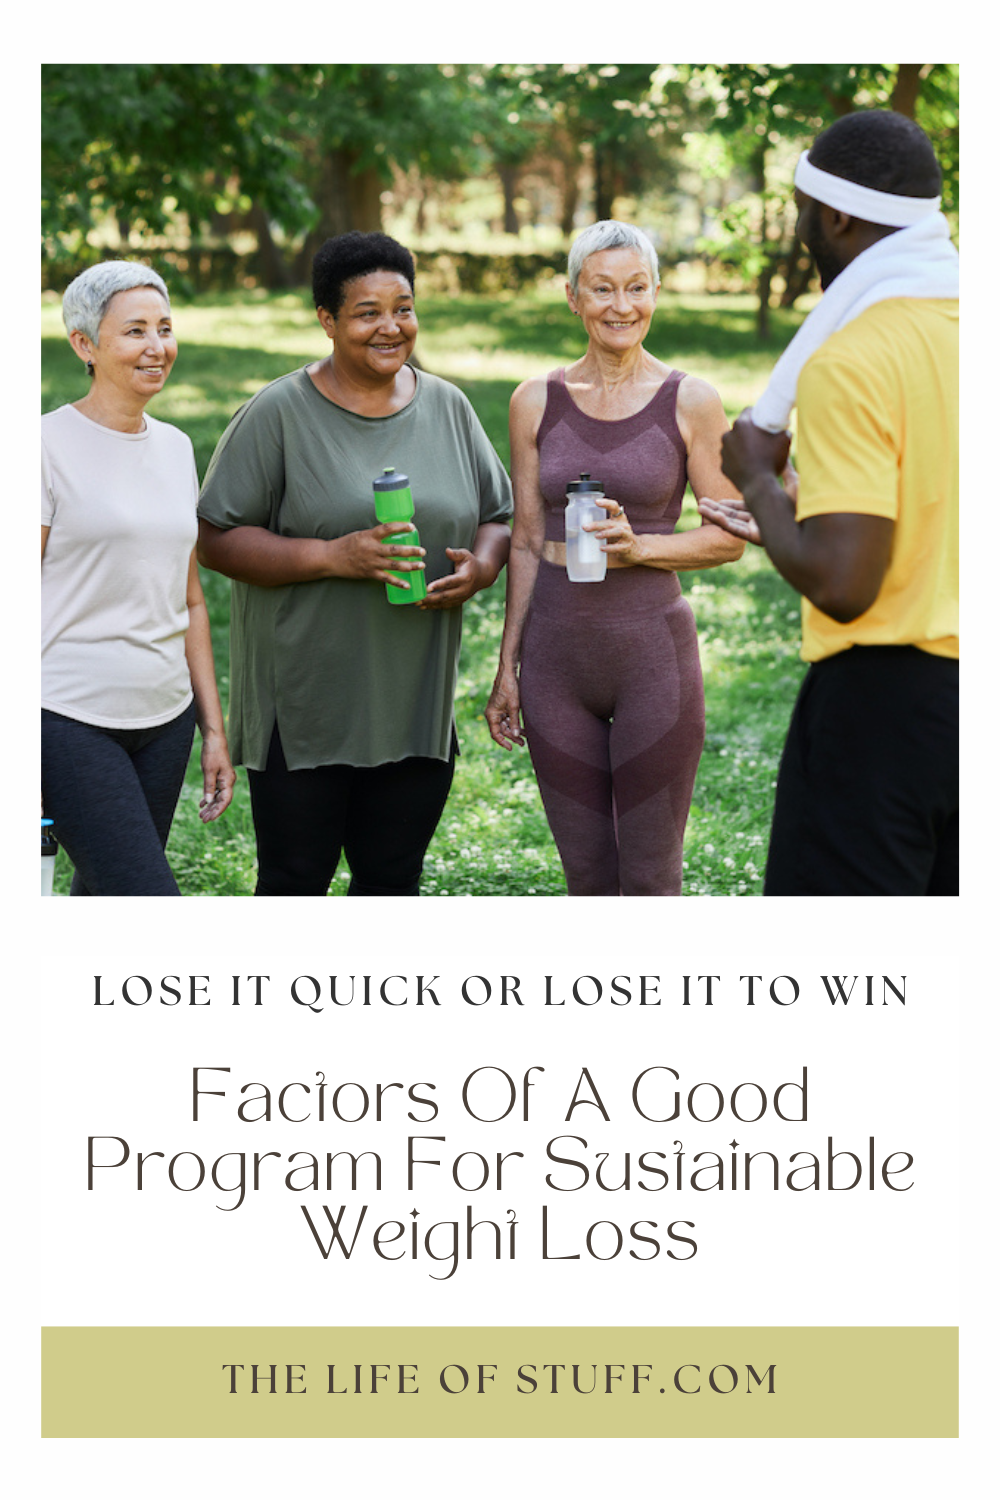 Factors Of A Good Program For Sustainable Weight Loss - The Life of Stuff